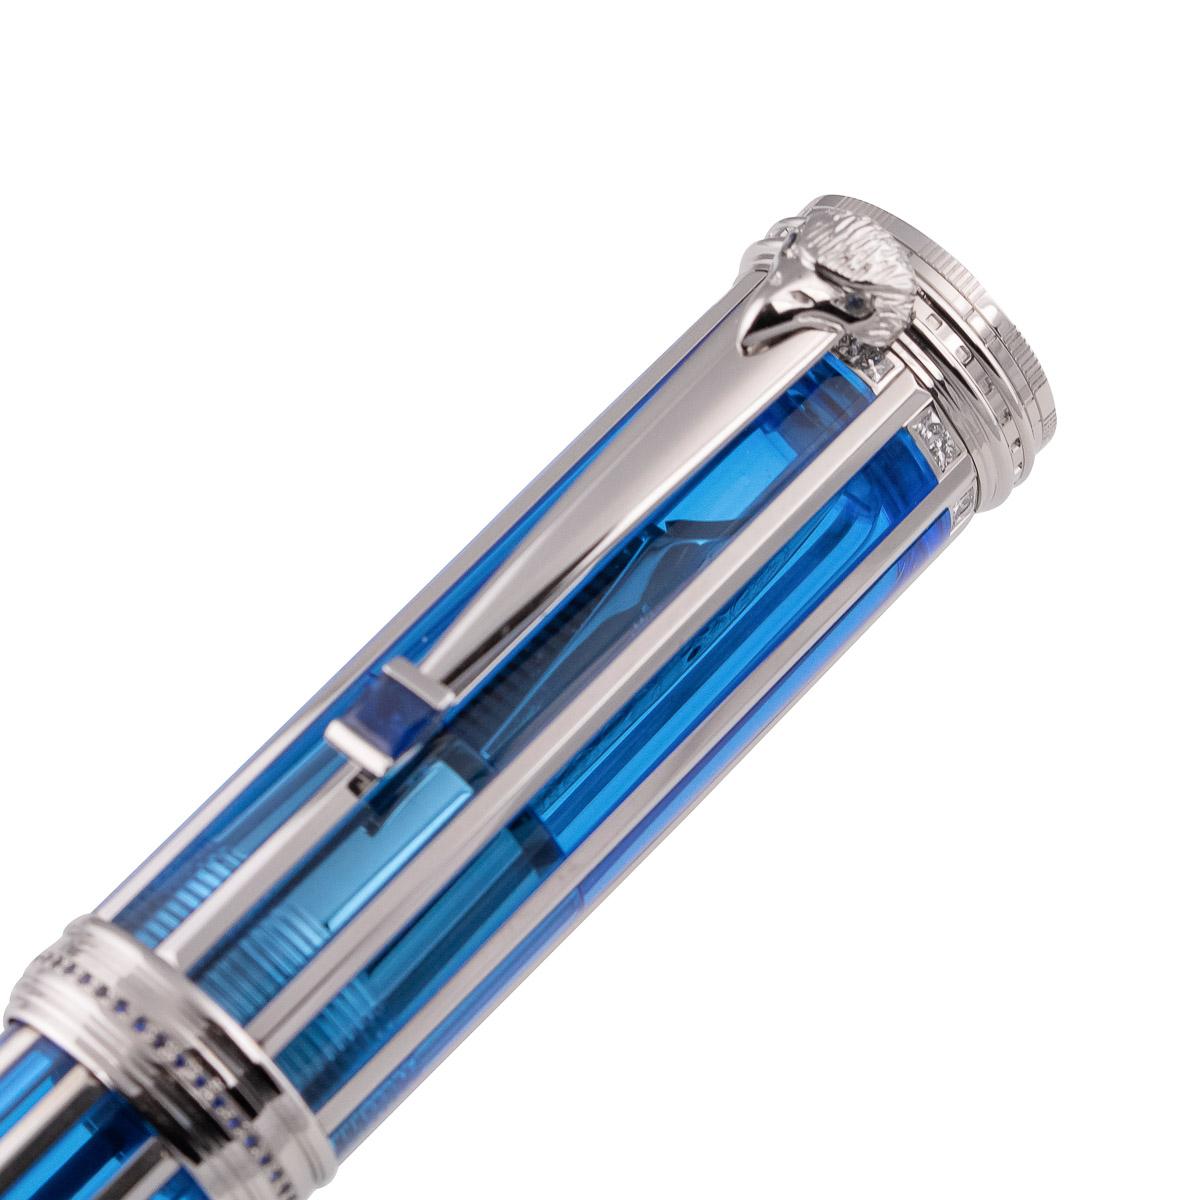 montblanc fountain pen limited edition